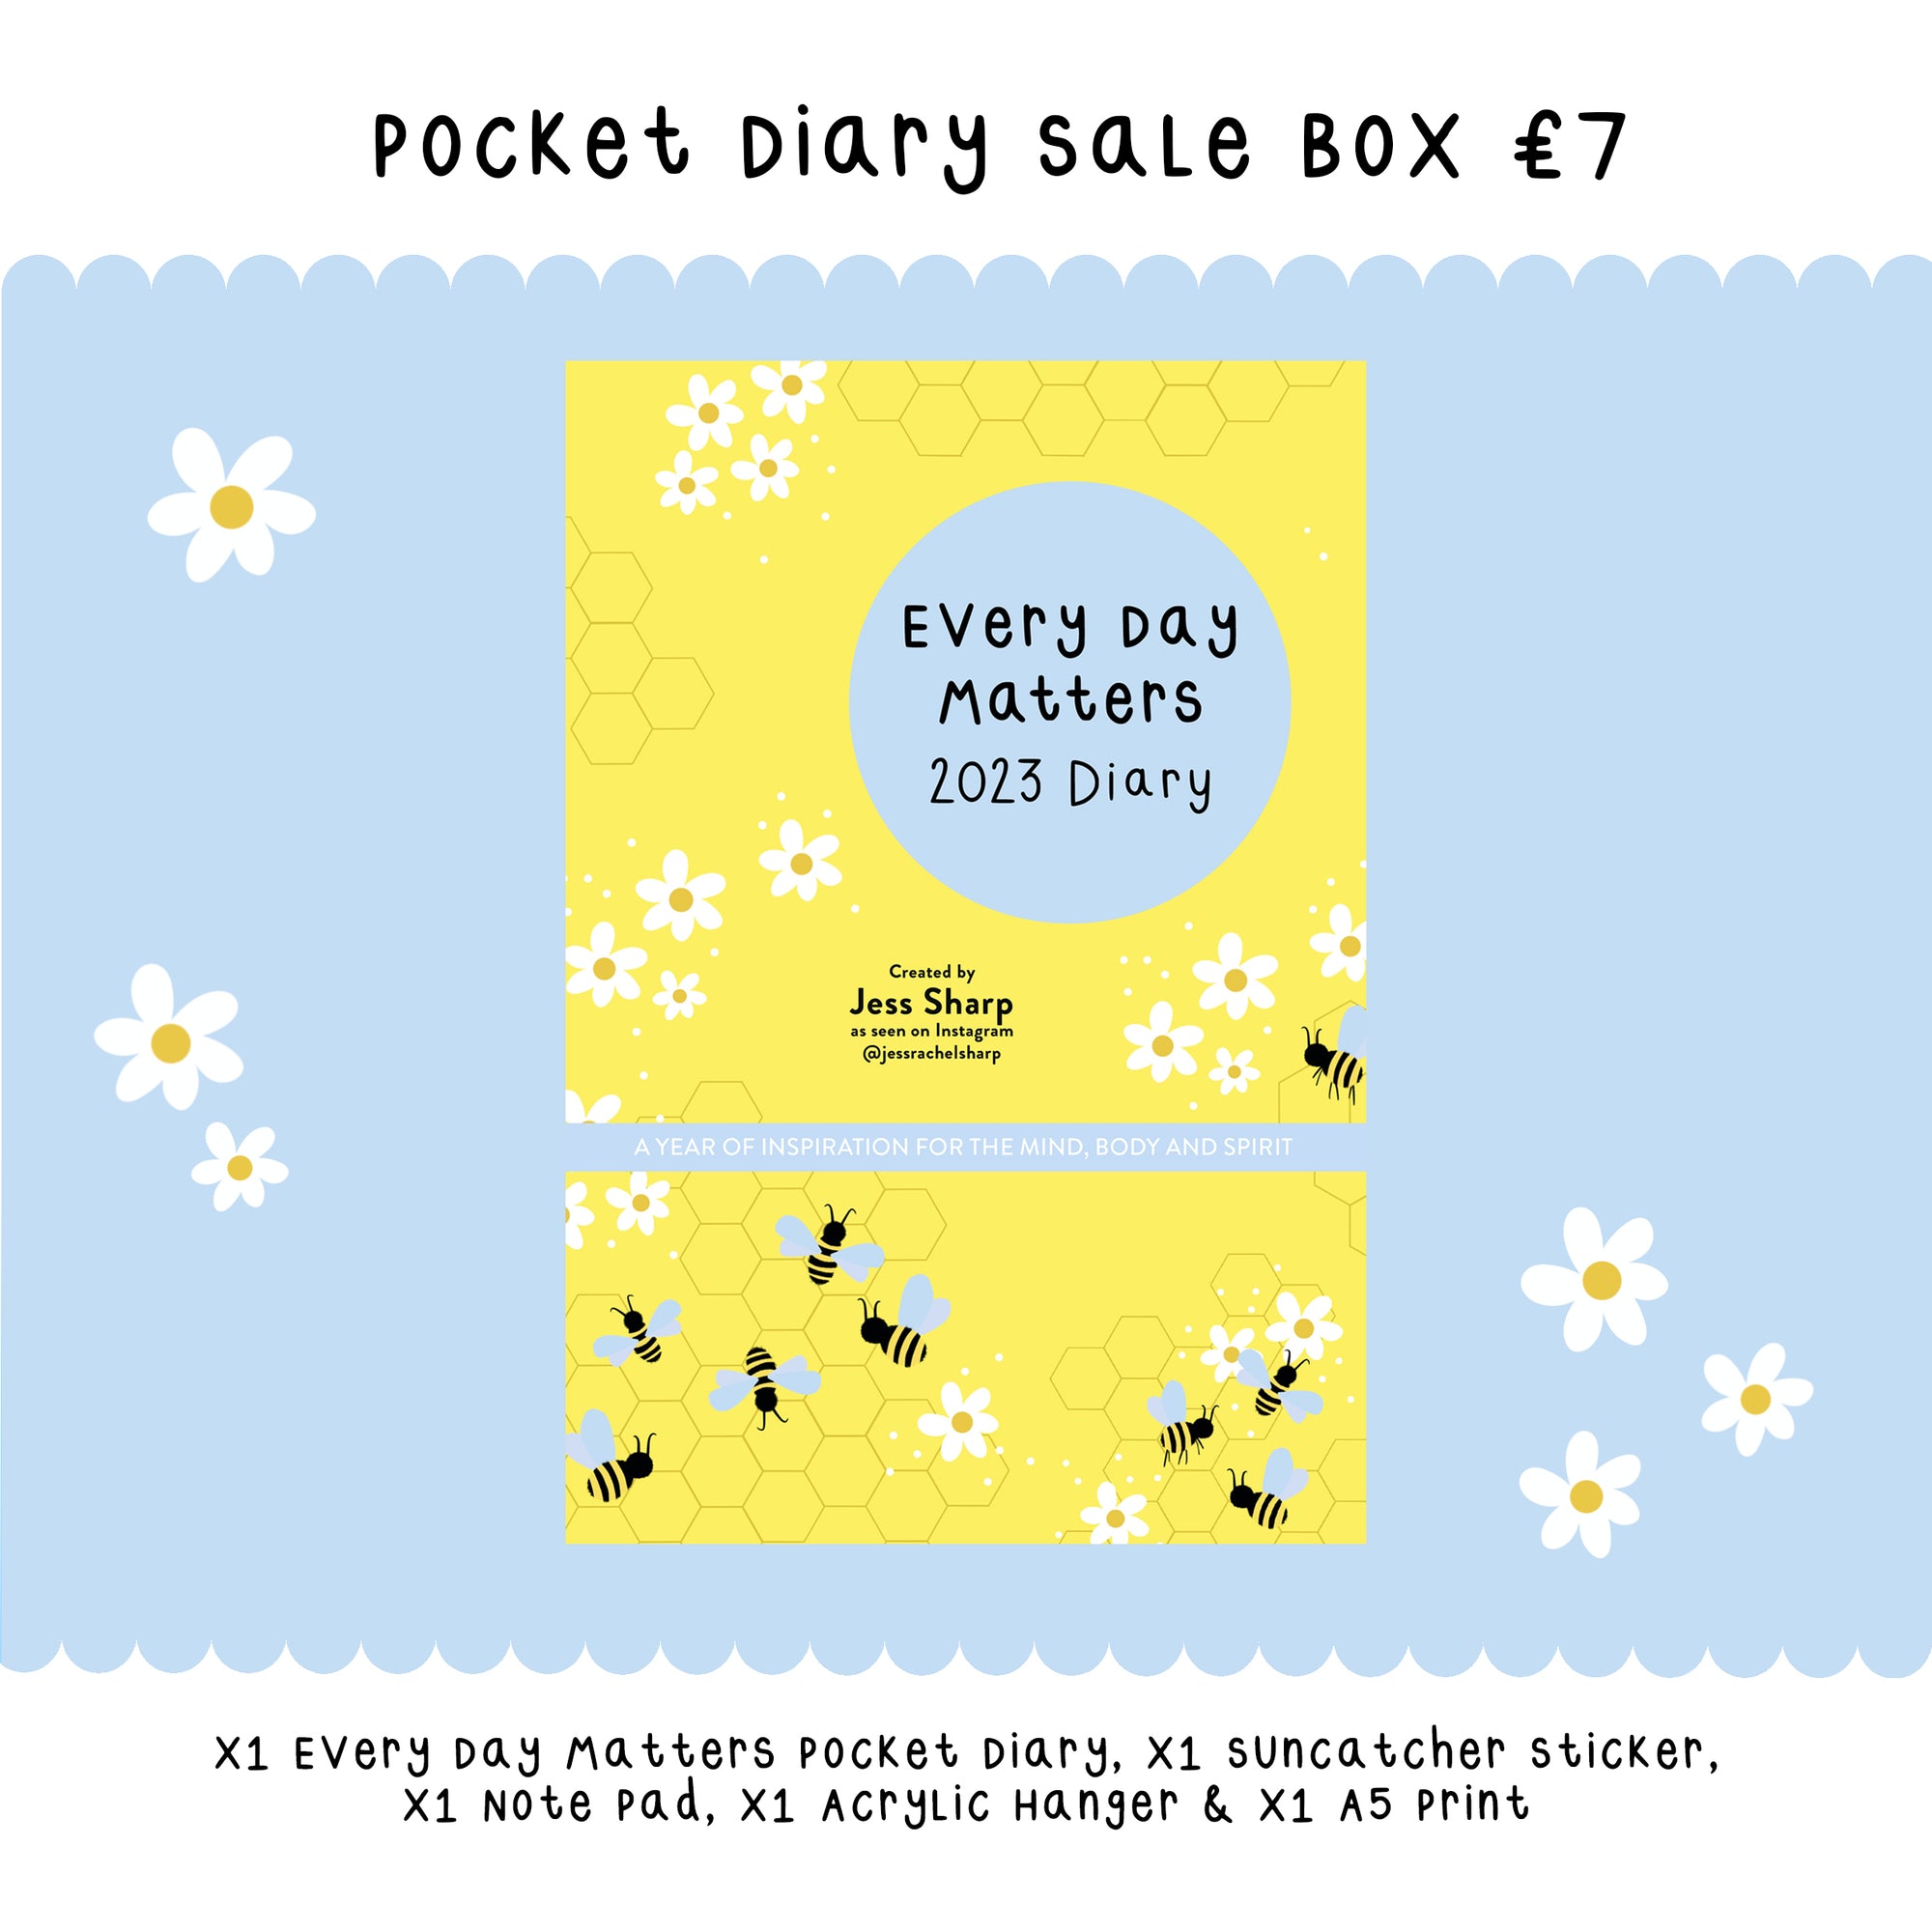 Every Day Matters Pocket Diary SALE BOX